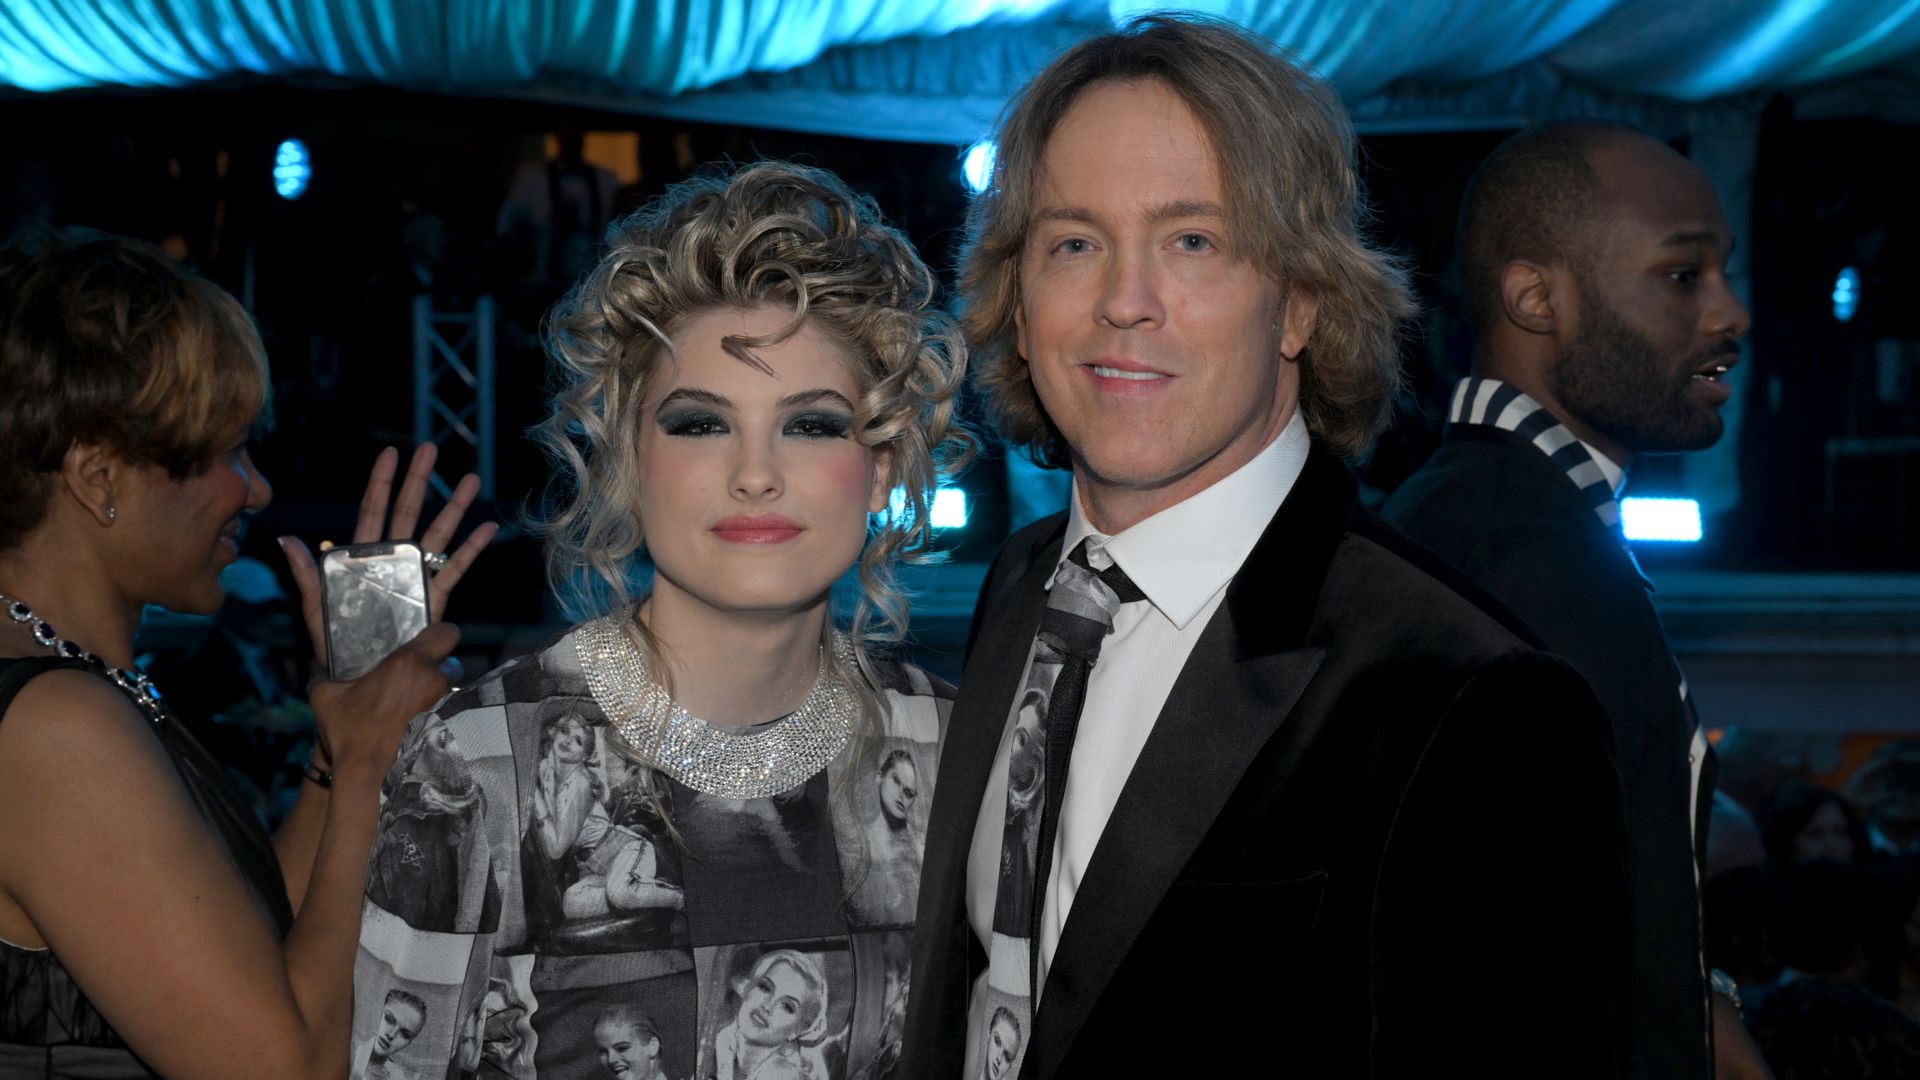 Anna Nicole Smith's ex Larry Birkhead pays touching tribute to late star on birthday